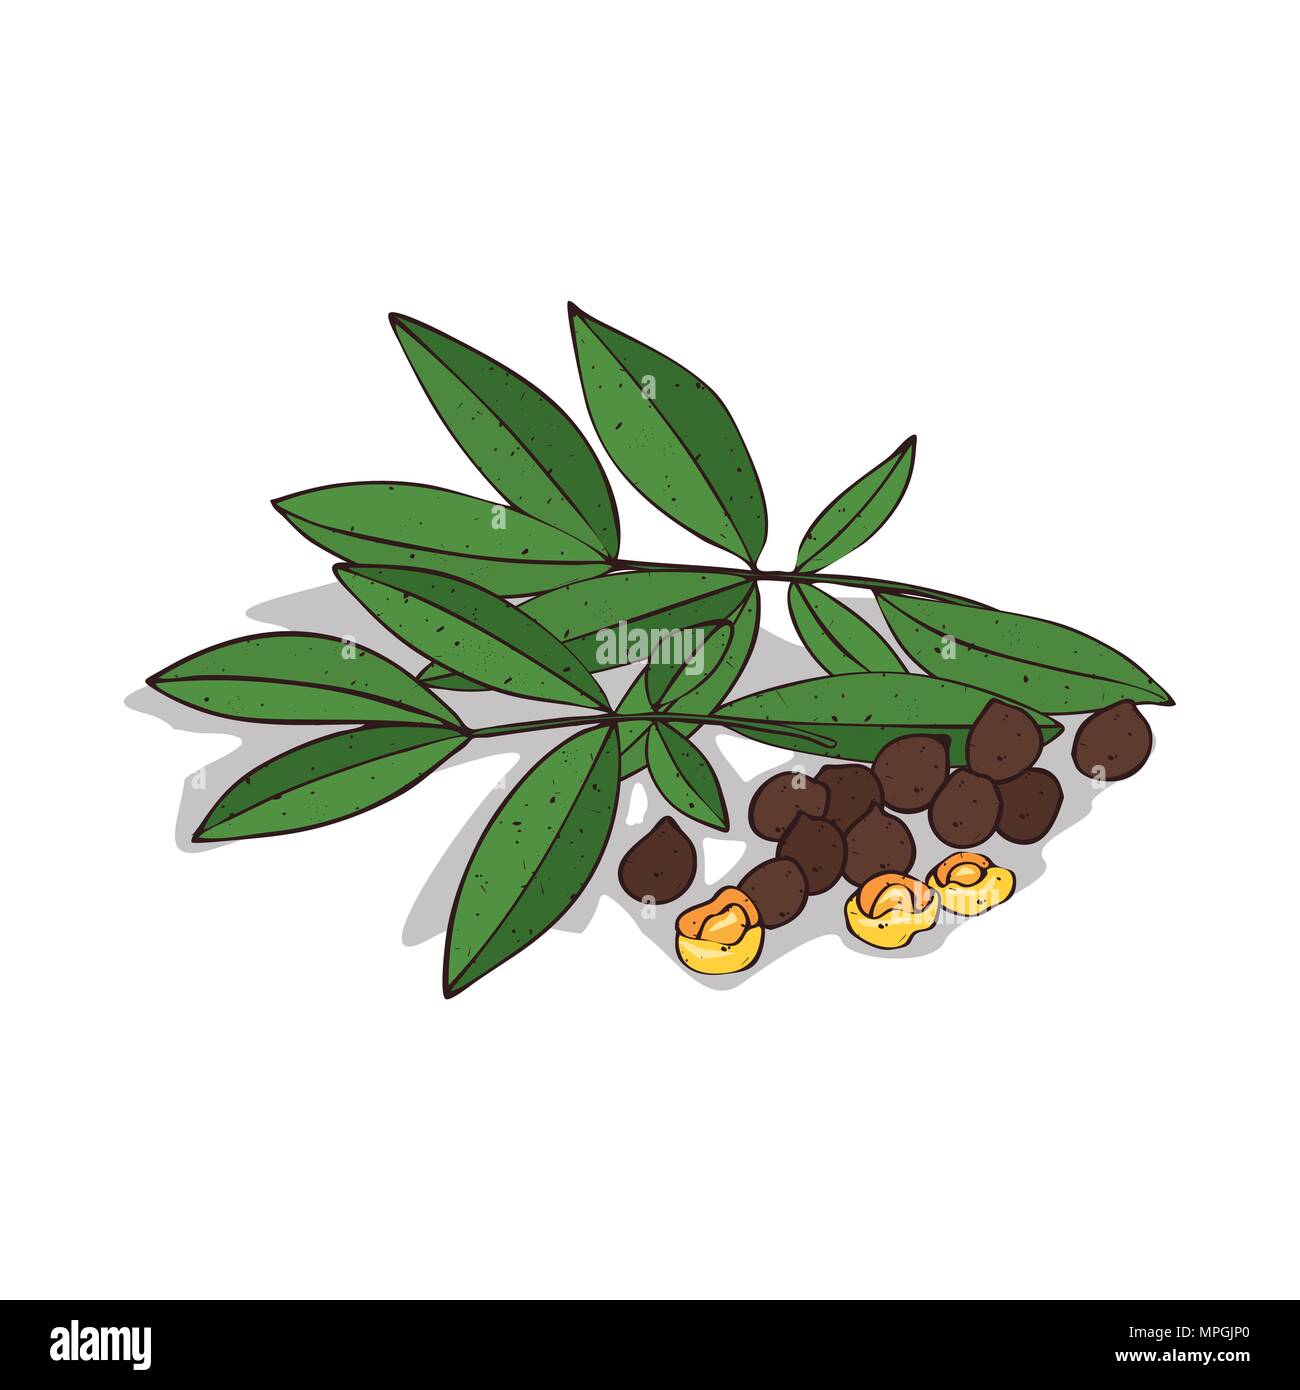 Isolated clipart of plant Kusum on white background. Botanical drawing of herb Schleichera oleosa with seeds and leaves Stock Vector